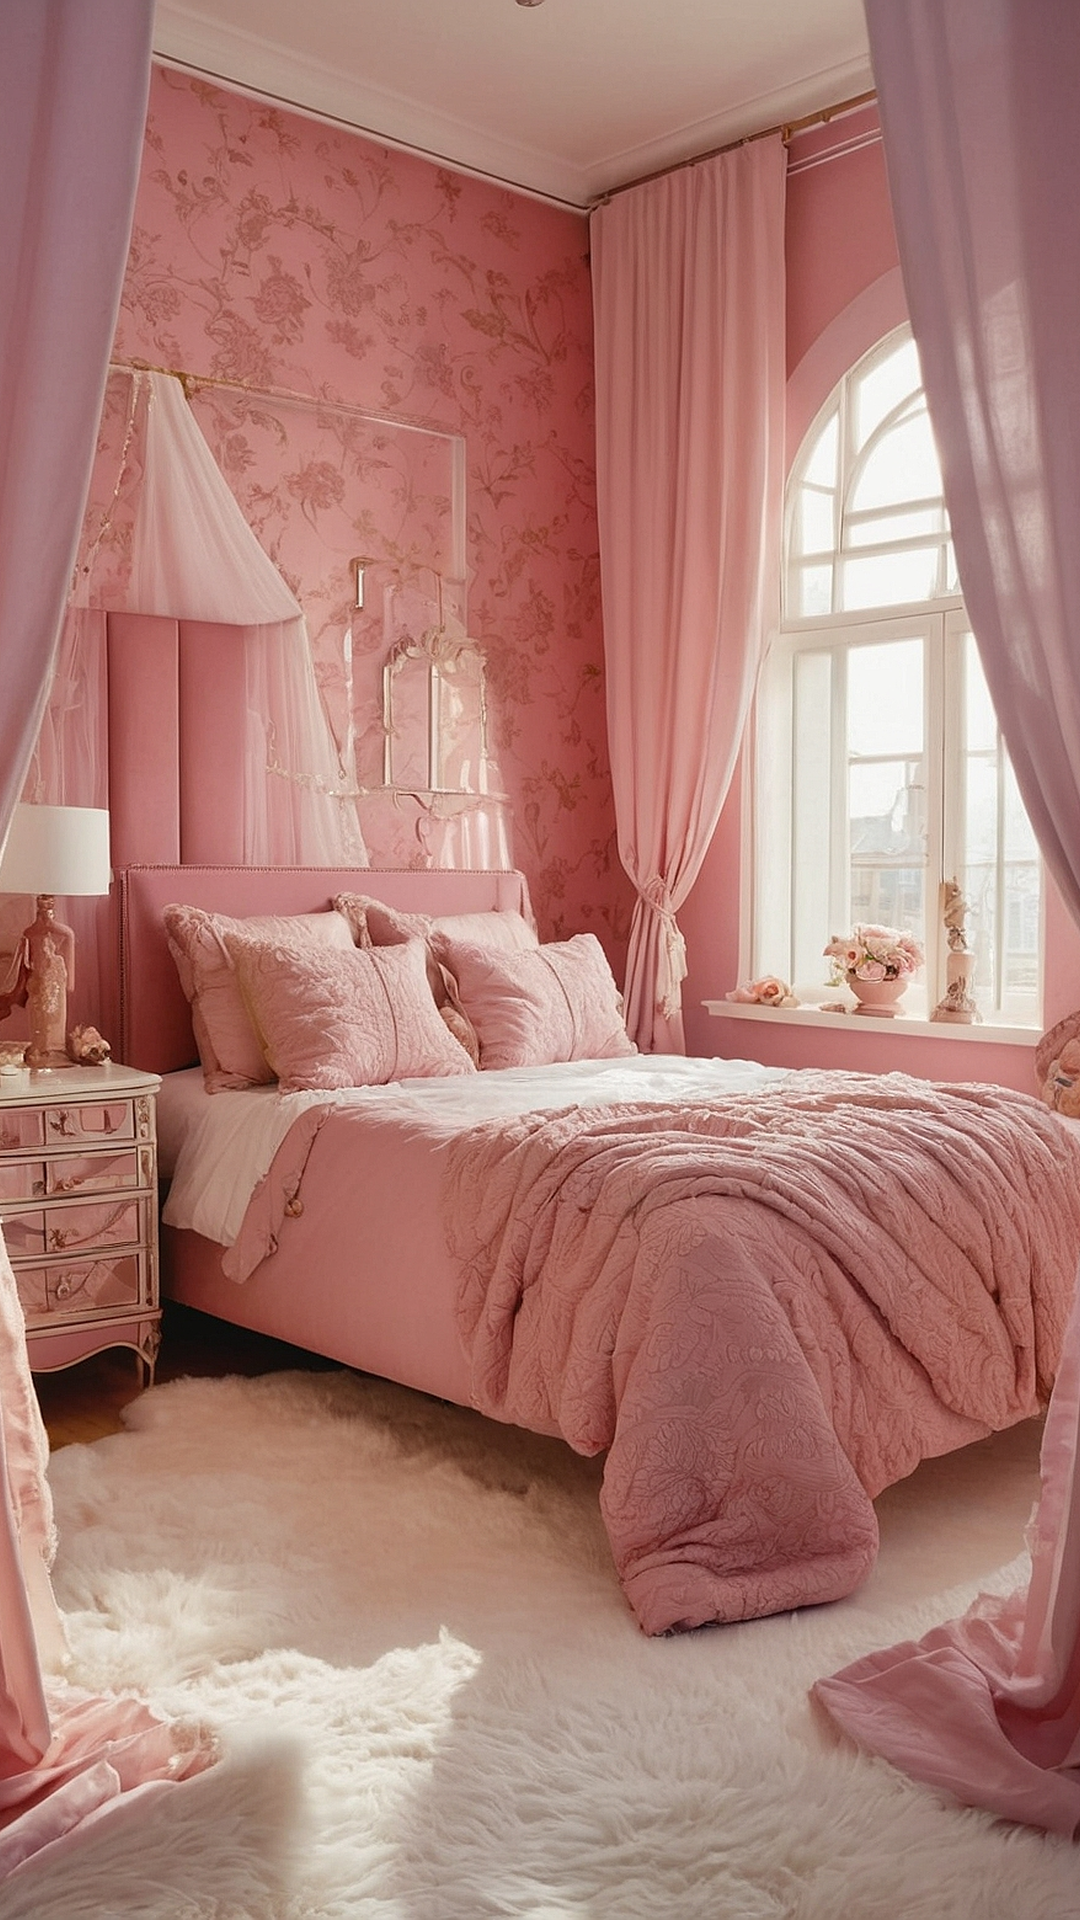 <p>Pink has the power to transform a space from mundane to magical. Soft blush tones paired with elegant accents in a bedroom can create a truly sophisticated ambiance. Imagine waking up to a room that feels like a luxurious escape, where the delicate pink hues dance with the natural light, casting a serene glow over every corner. Incorporating touches of gold or silver can add a touch of glam to the chic pink palette, elevating the overall elegance of the space. With plush textures like velvet throws and satin cushions, and perhaps a statement chandelier hanging overhead, the room becomes a sanctuary of style and comfort.</p><p>Stepping into a bedroom designed with a pink chic theme evokes a sense of modern romance and timeless beauty. The combination of sleek lines with plush fabrics in shades of pink can create a space that is both fashion-forward and cozy. Picture a canopy bed draped in soft pink curtains, complemented by a fluffy rug underfoot that invites you to sink right in. Mixing patterns like stripes or florals in coordinating shades of pink can add depth and visual interest without overwhelming the space. Complete the look with a gallery wall of art prints in gilded frames and some fresh blooms in a delicate vase, and you have a bedroom that exudes elegance and charm.</p>